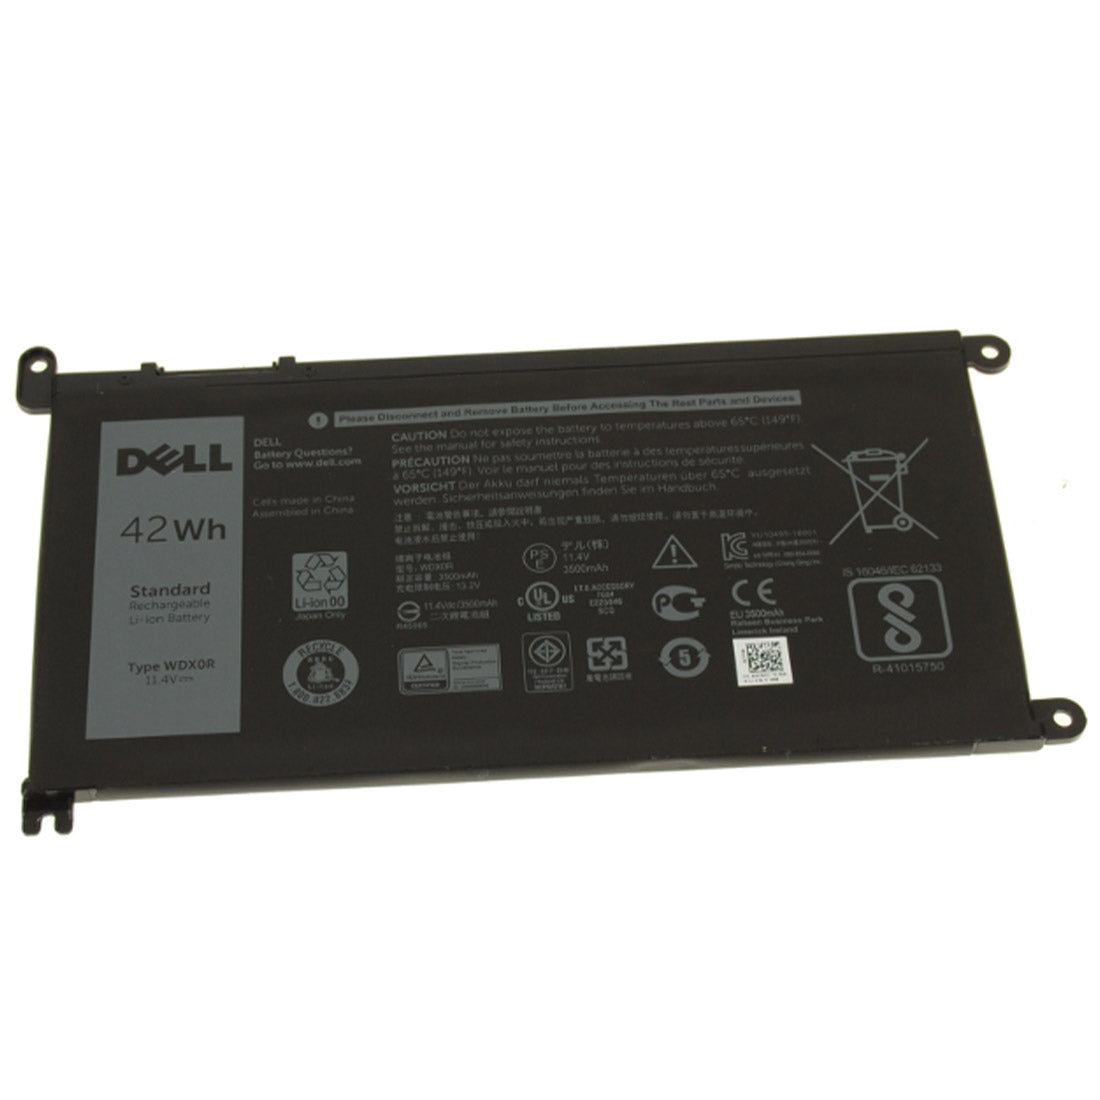 Dell Original 3500mAh 11.4V 42WHR 3-Cell Replacement Laptop Battery for Lattitude 3189